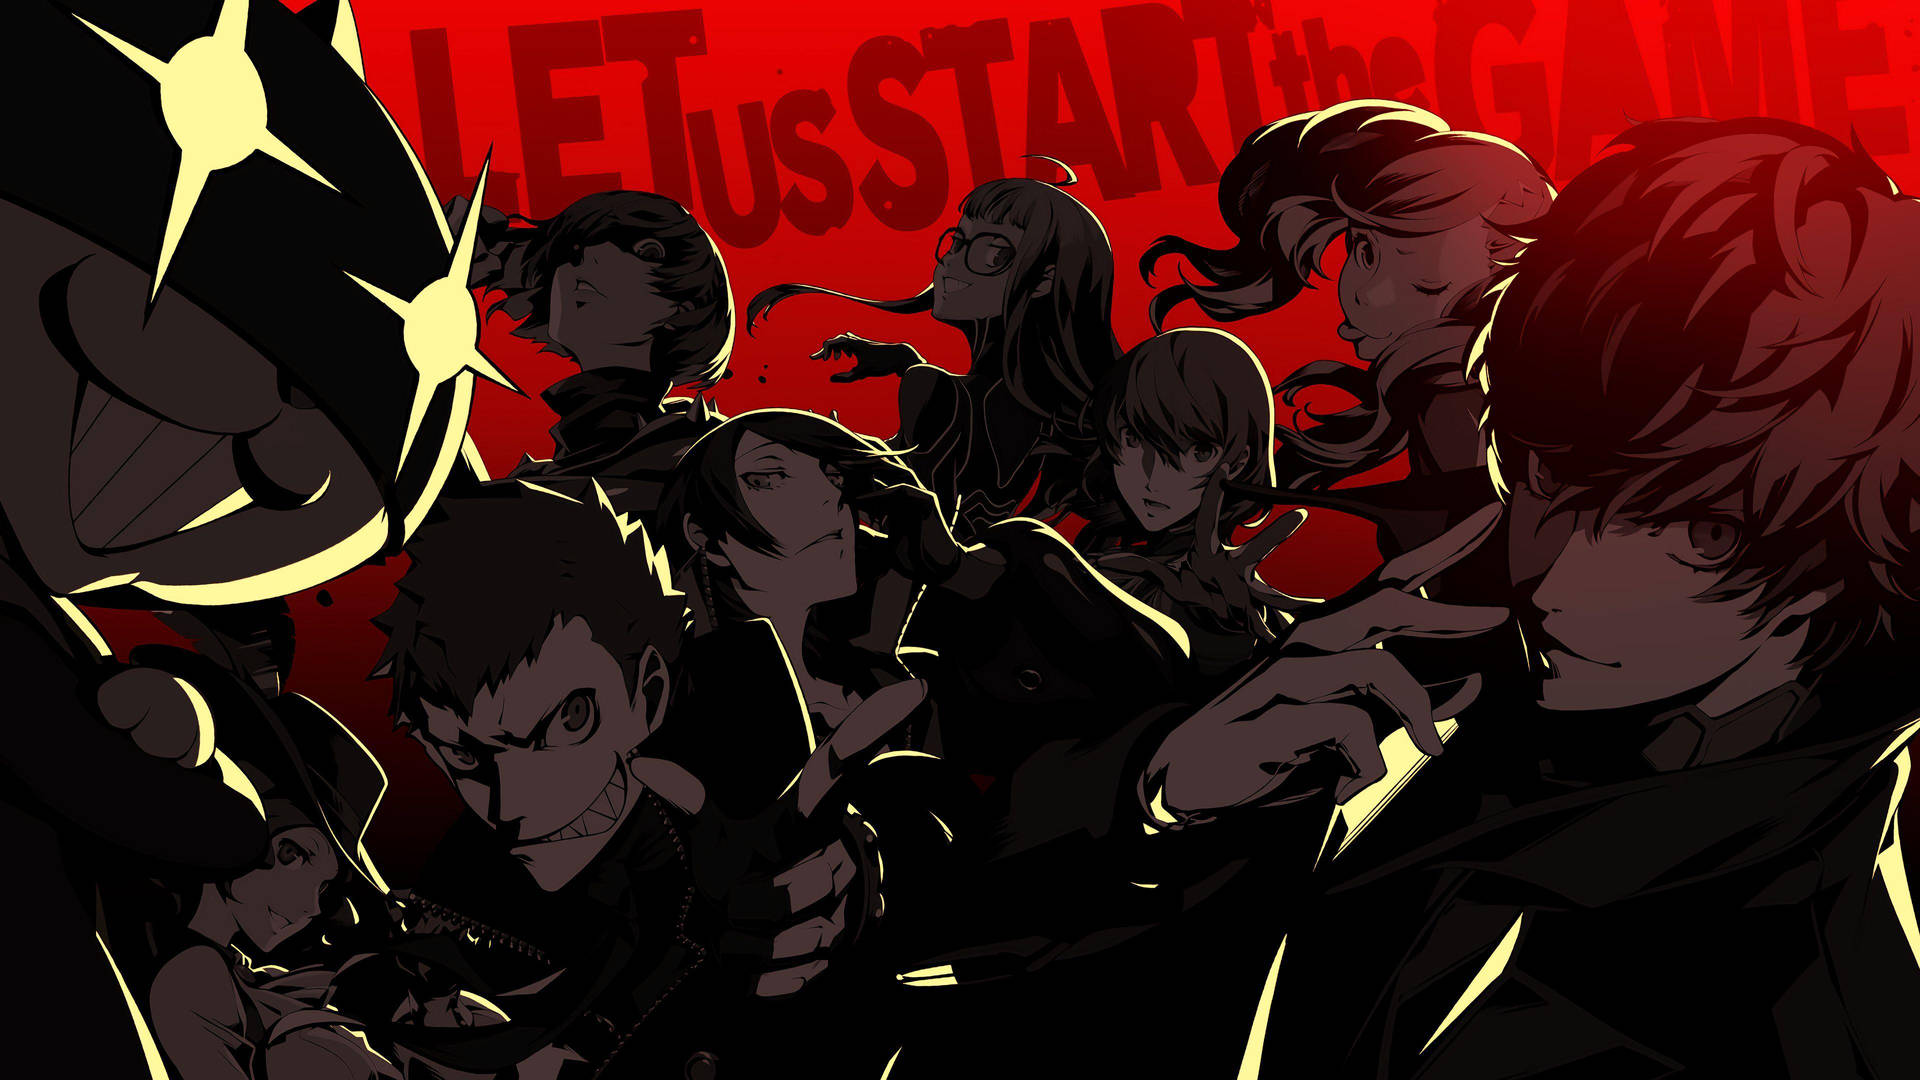 Persona 5 Royal Characters' Silhouettes